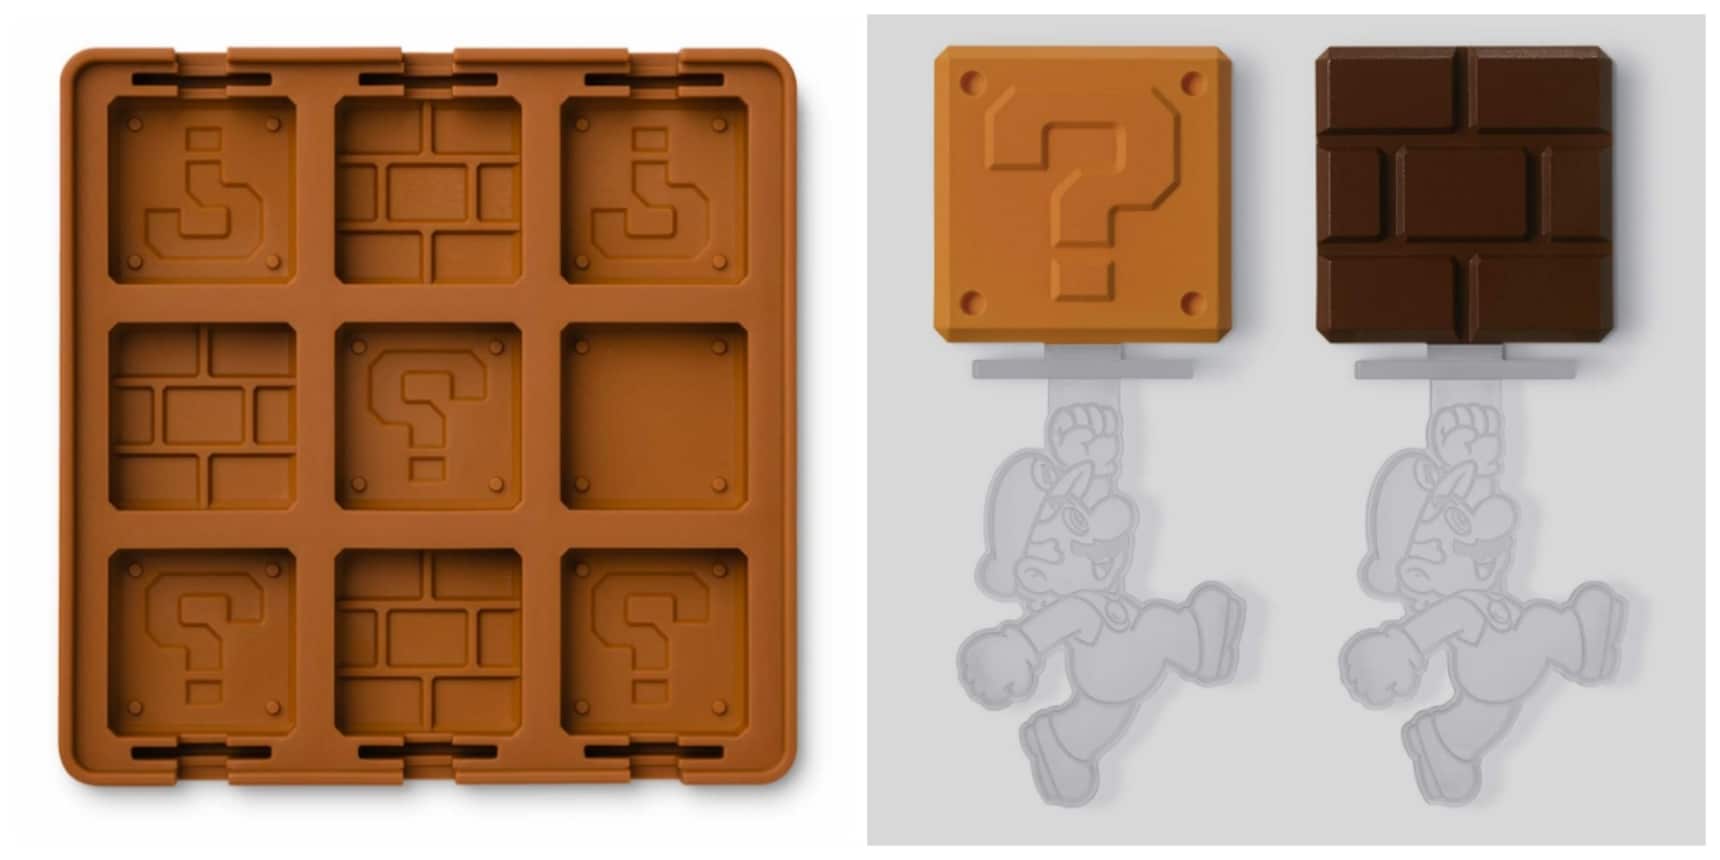 Super Mario to Help Punch Up Your Baked Goods